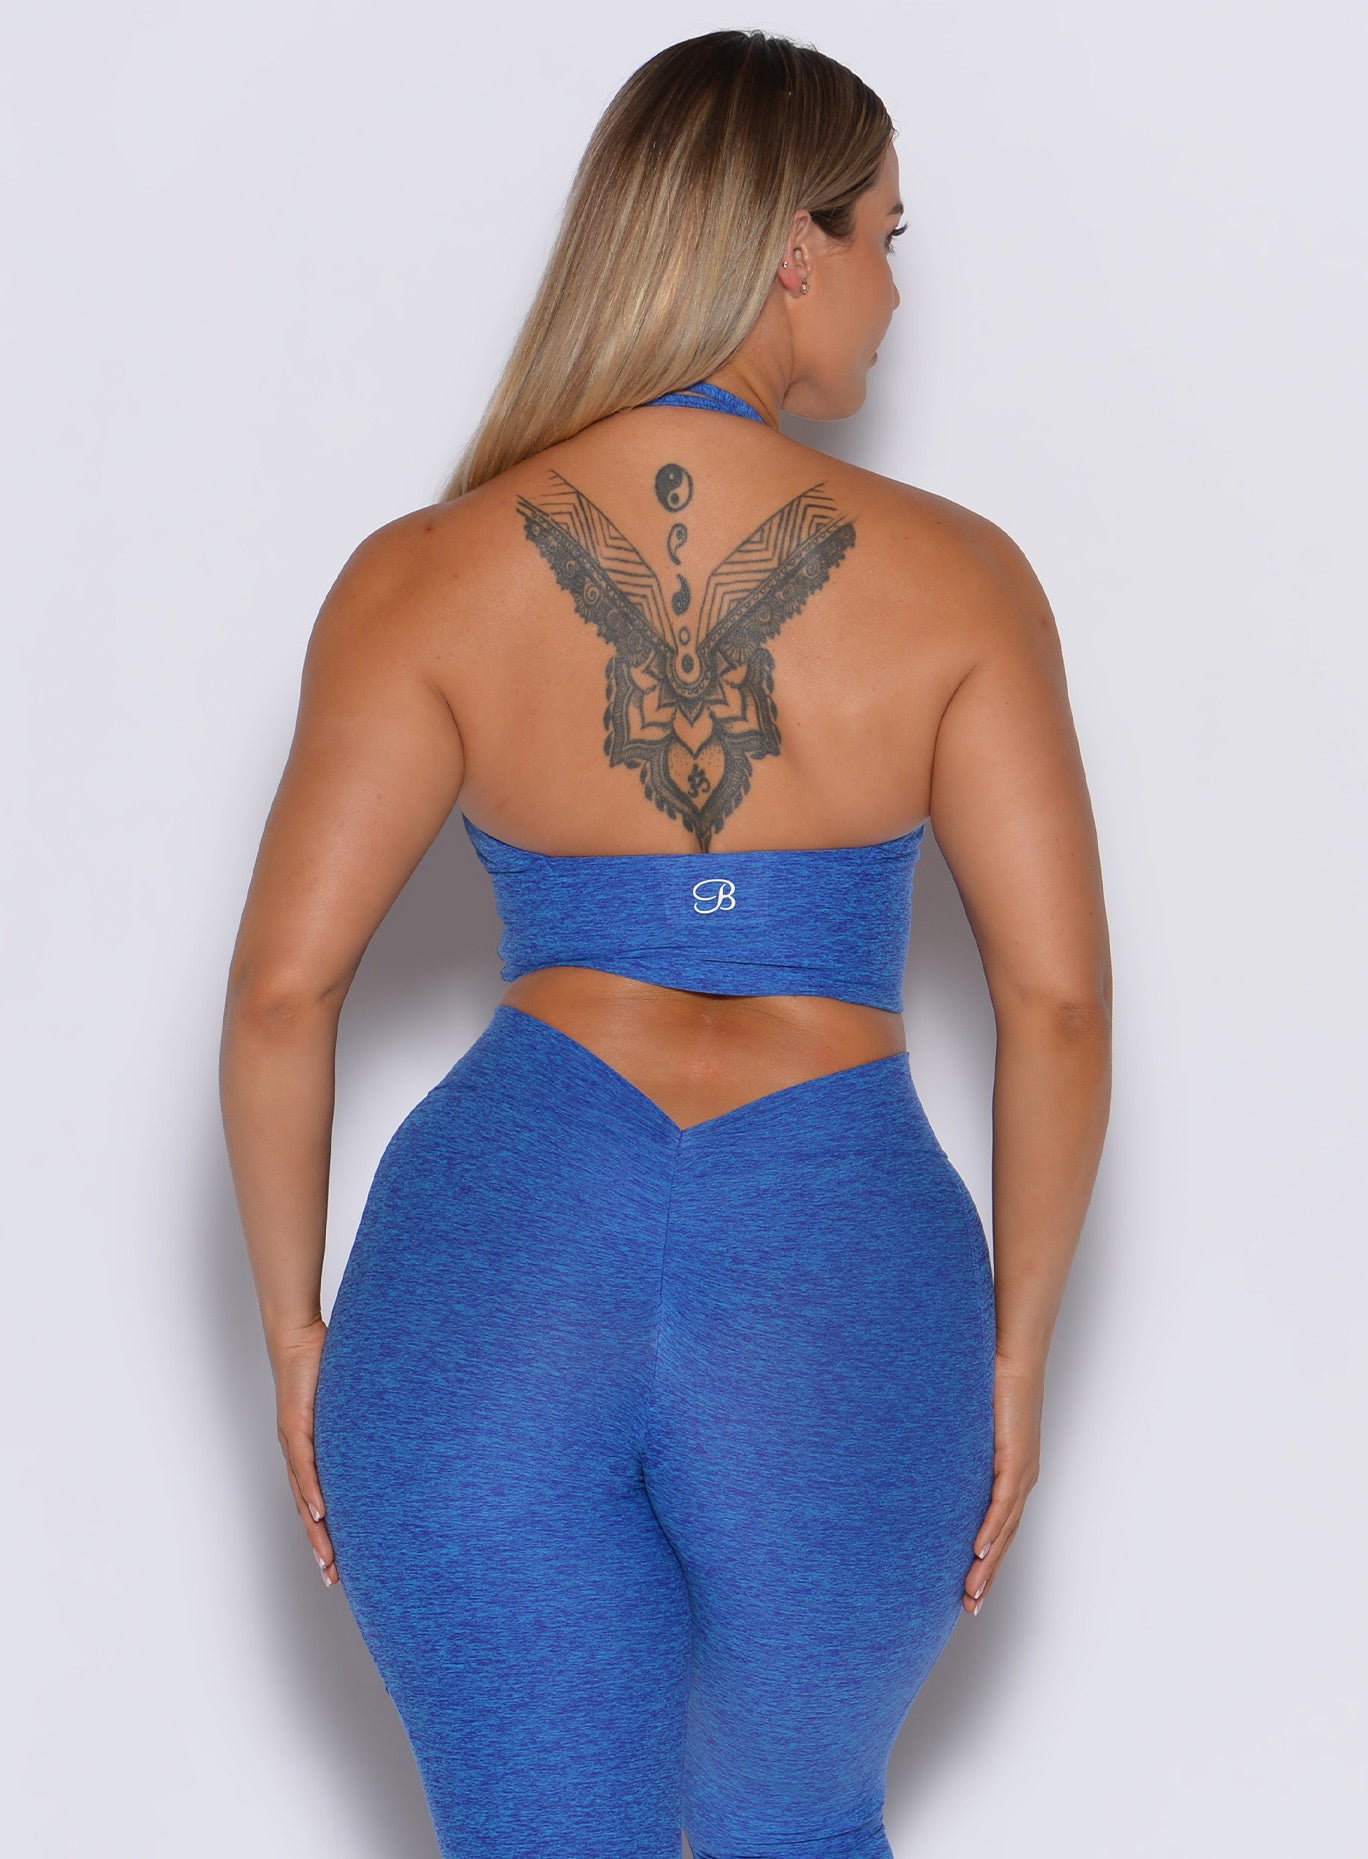 back profile view of a model wearing our longline backless bra in Neon blue rave color along with a matching leggings